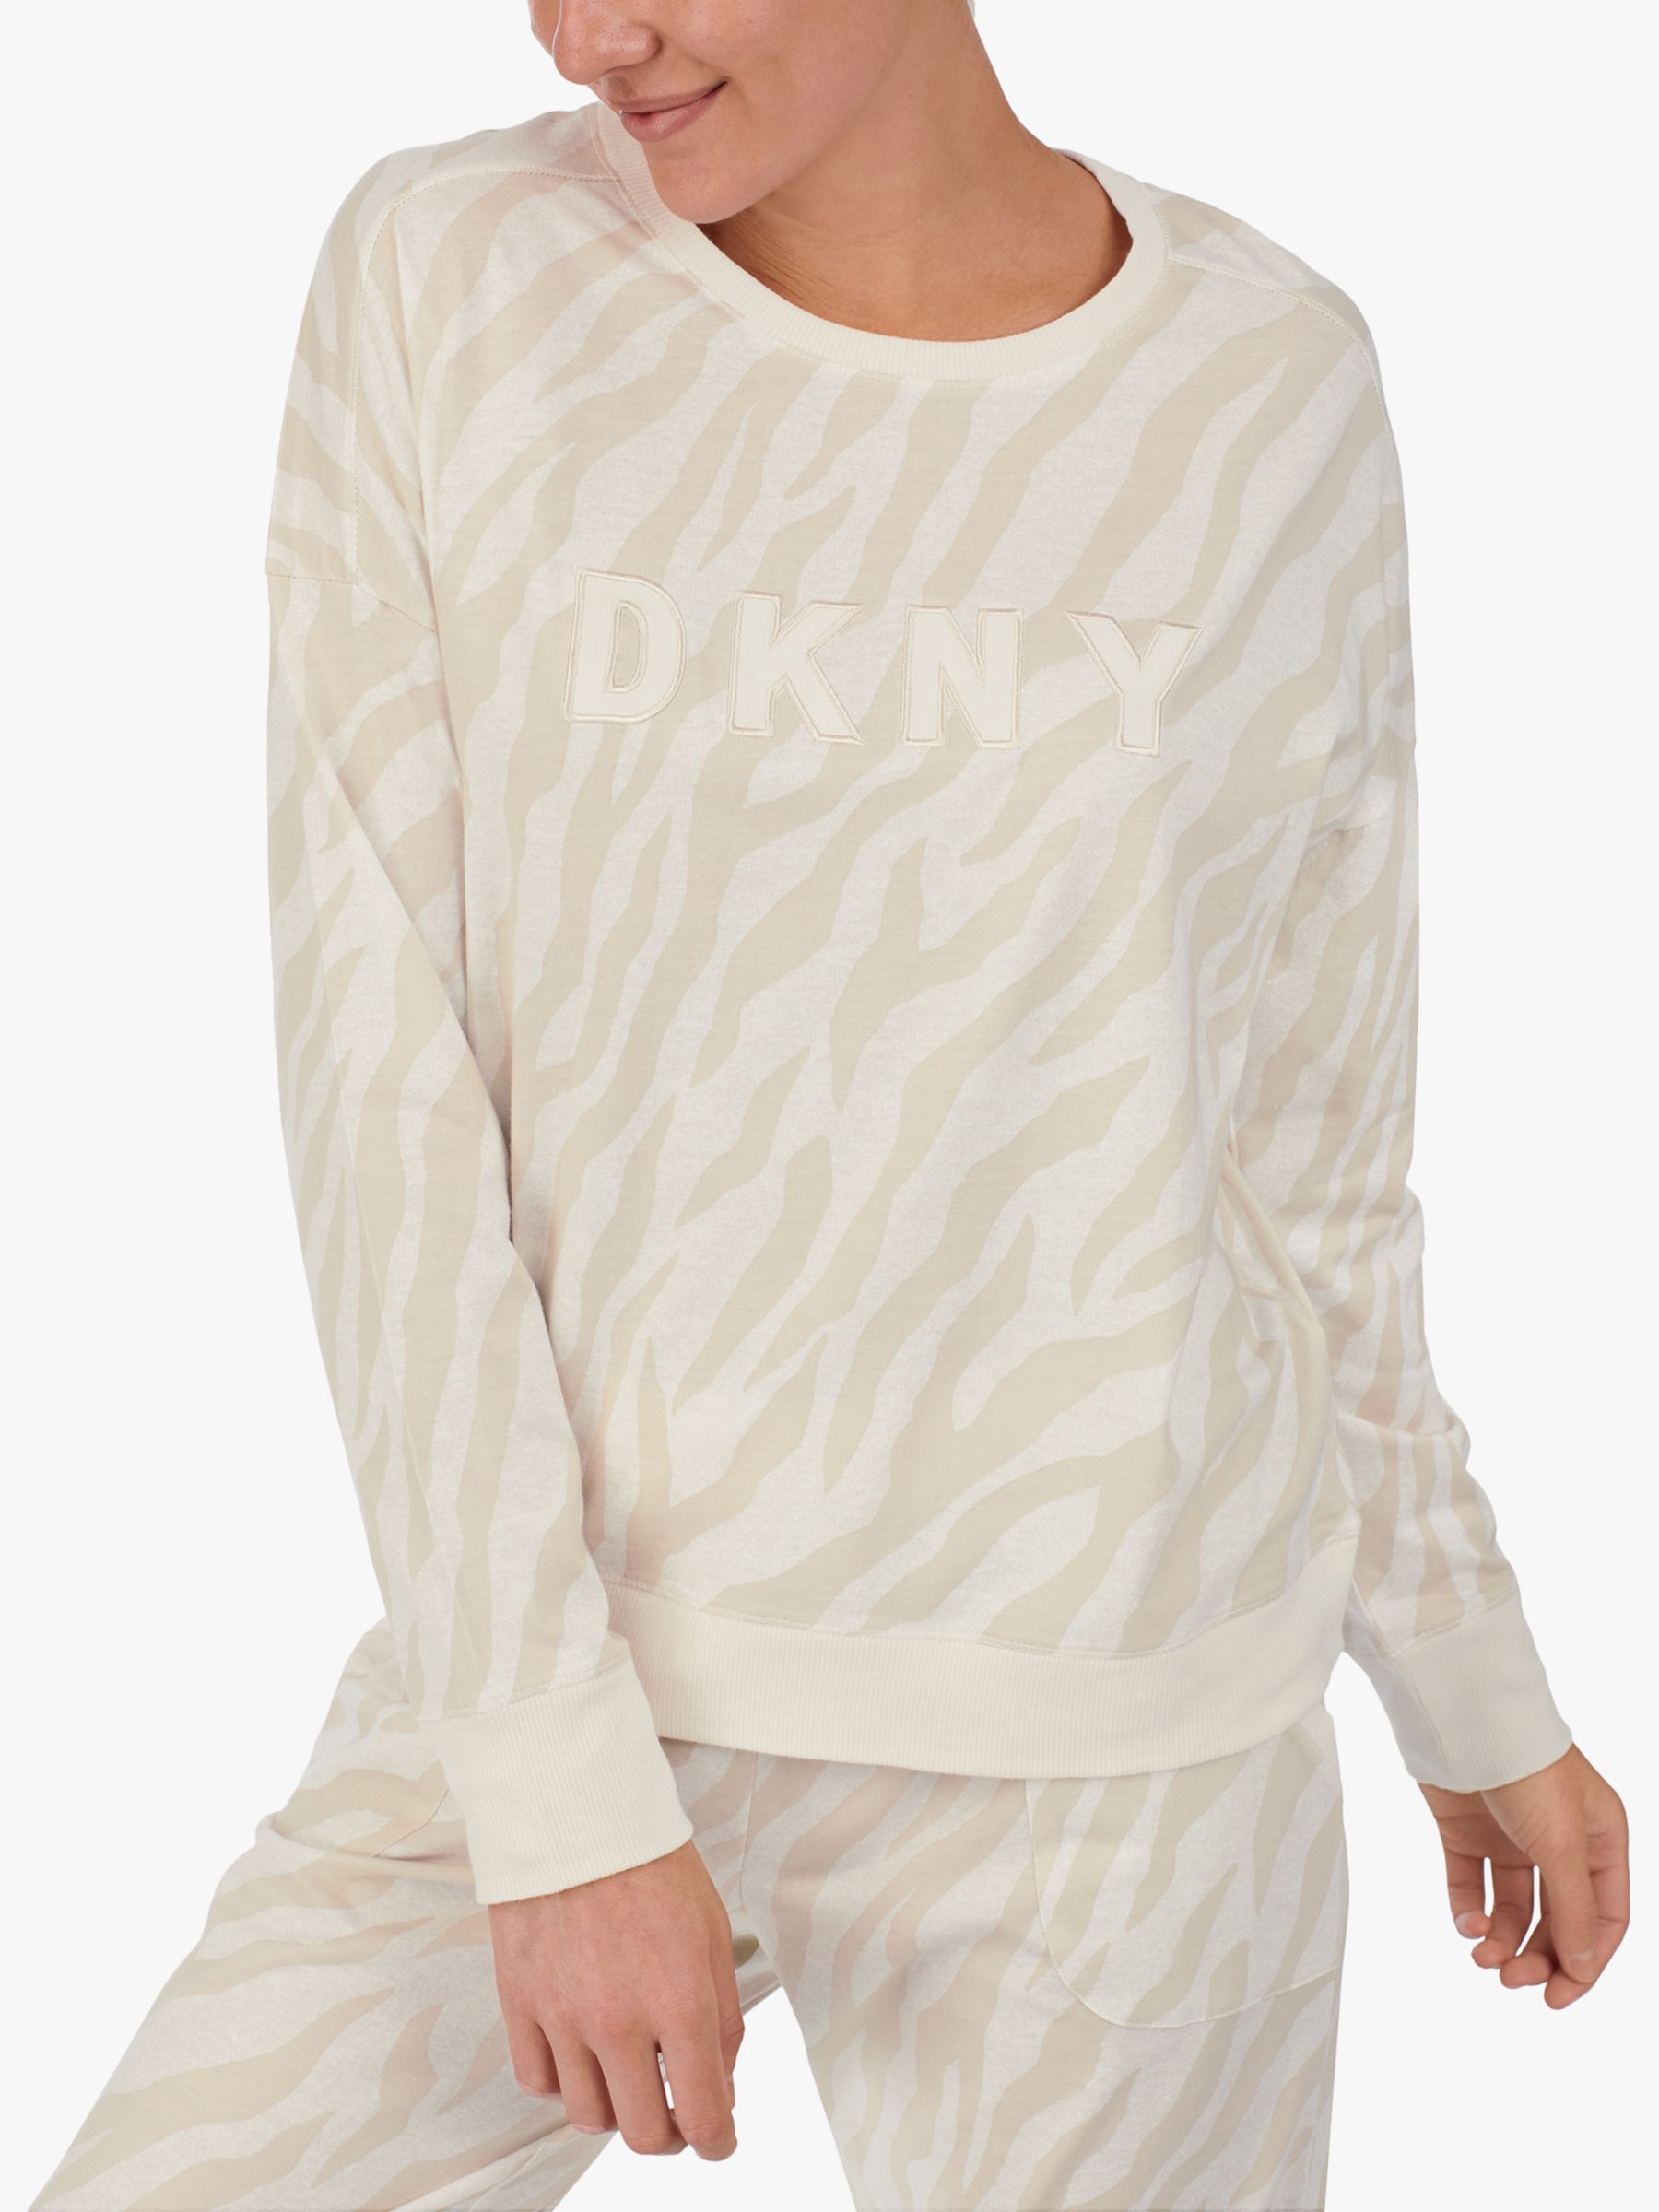 DKNY Lounge set NEW SIGNATURE in cream